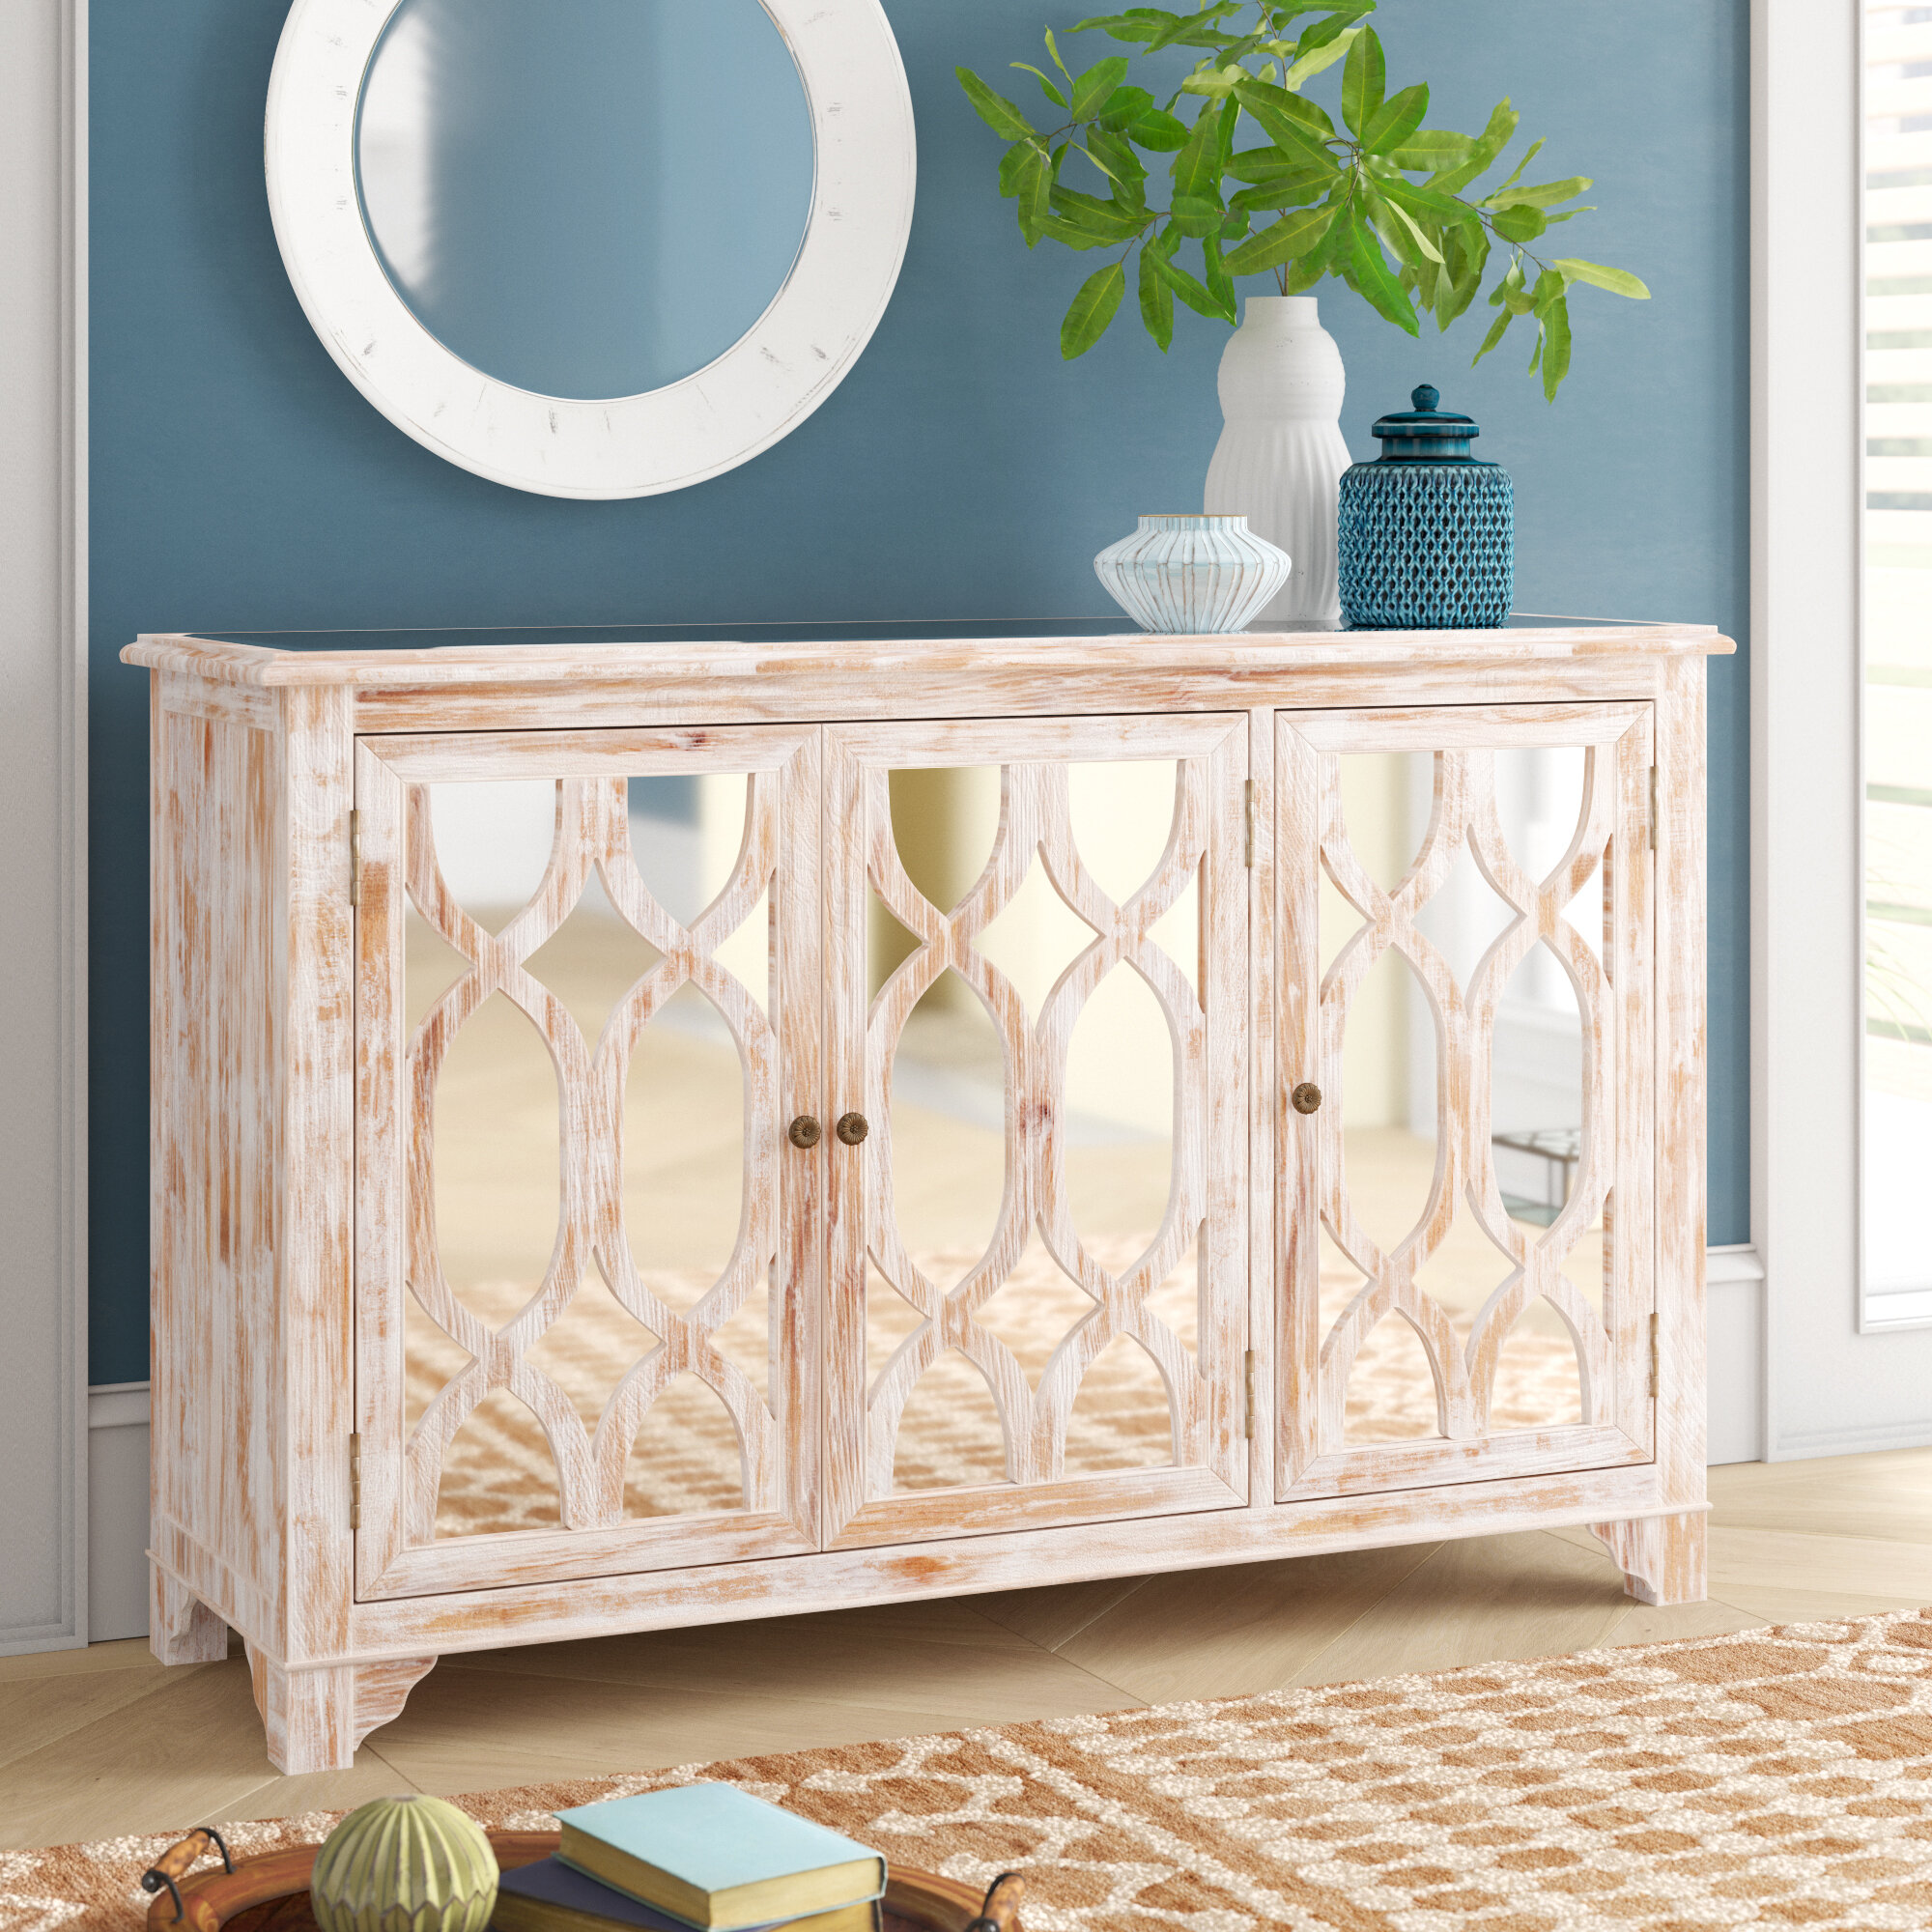 Mirrored Sideboard Buffet Tables Up To 65 Off Through 12 04 Wayfair